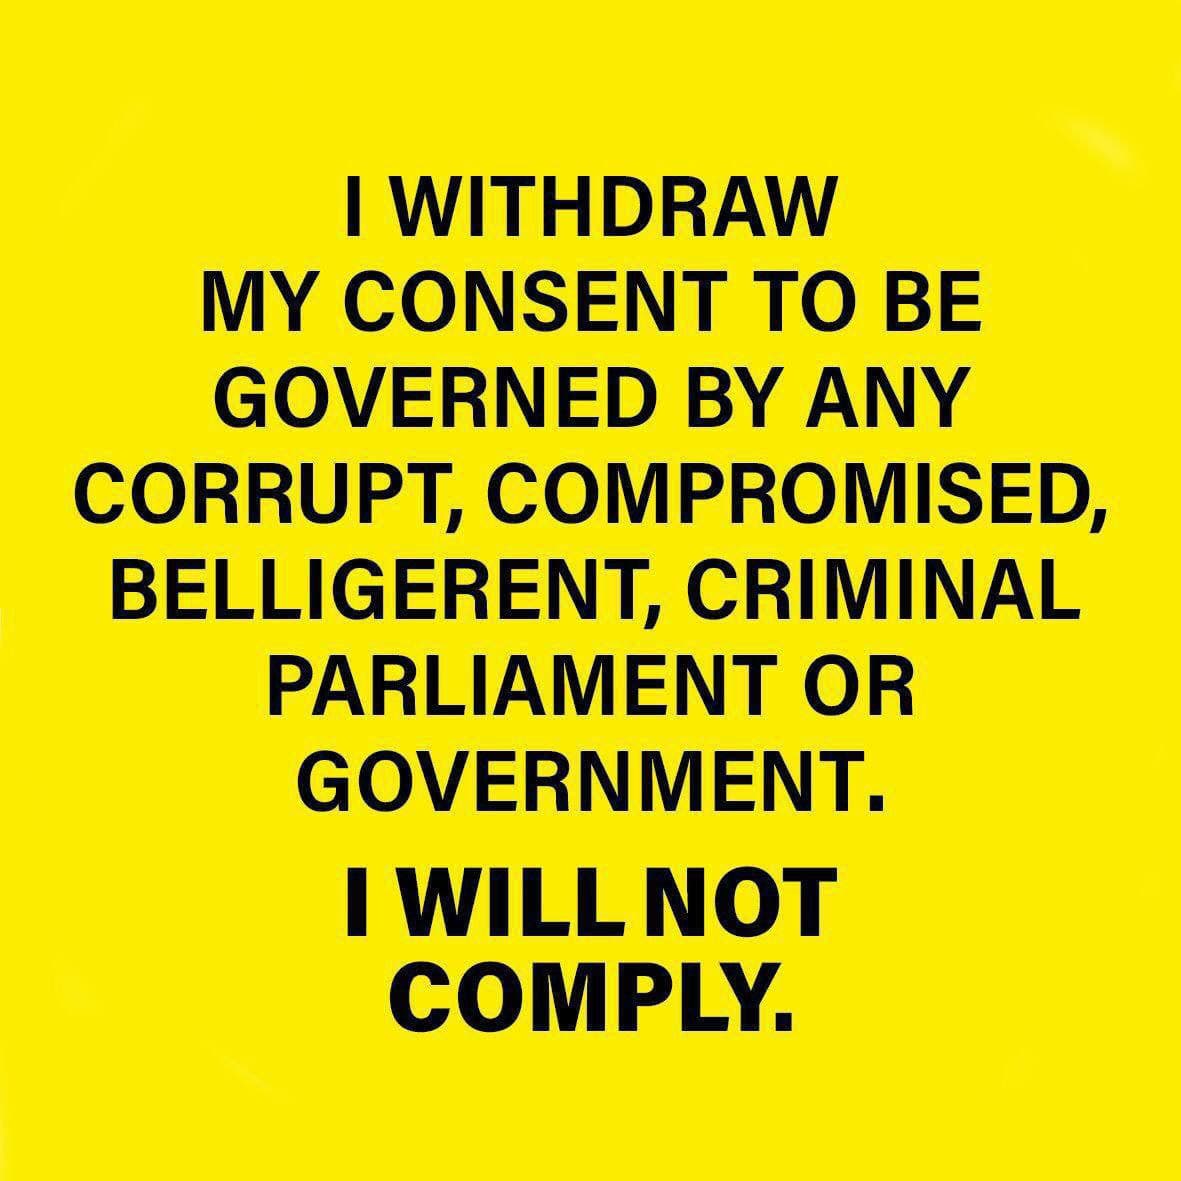 Dr_Jo_Whitaker__I_withdraw_my_consent_to_be_governed_by_any_corrupt__compromised__belligerent__criminal_parliament_or_government__i2.jpg [ Album ]